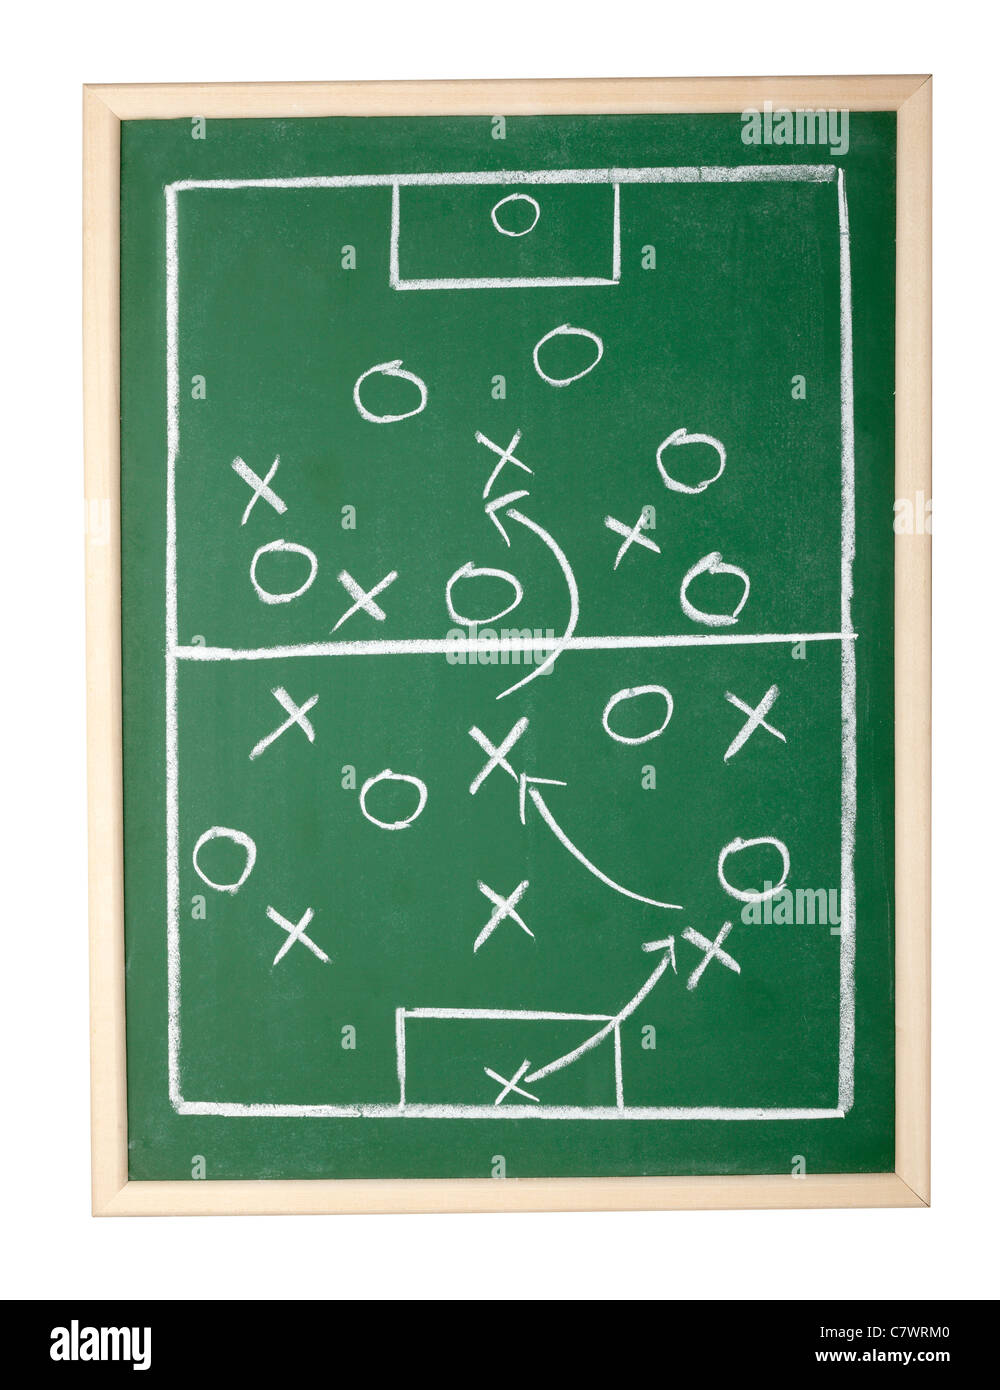 soccer game drawing on a blackboard Stock Photo